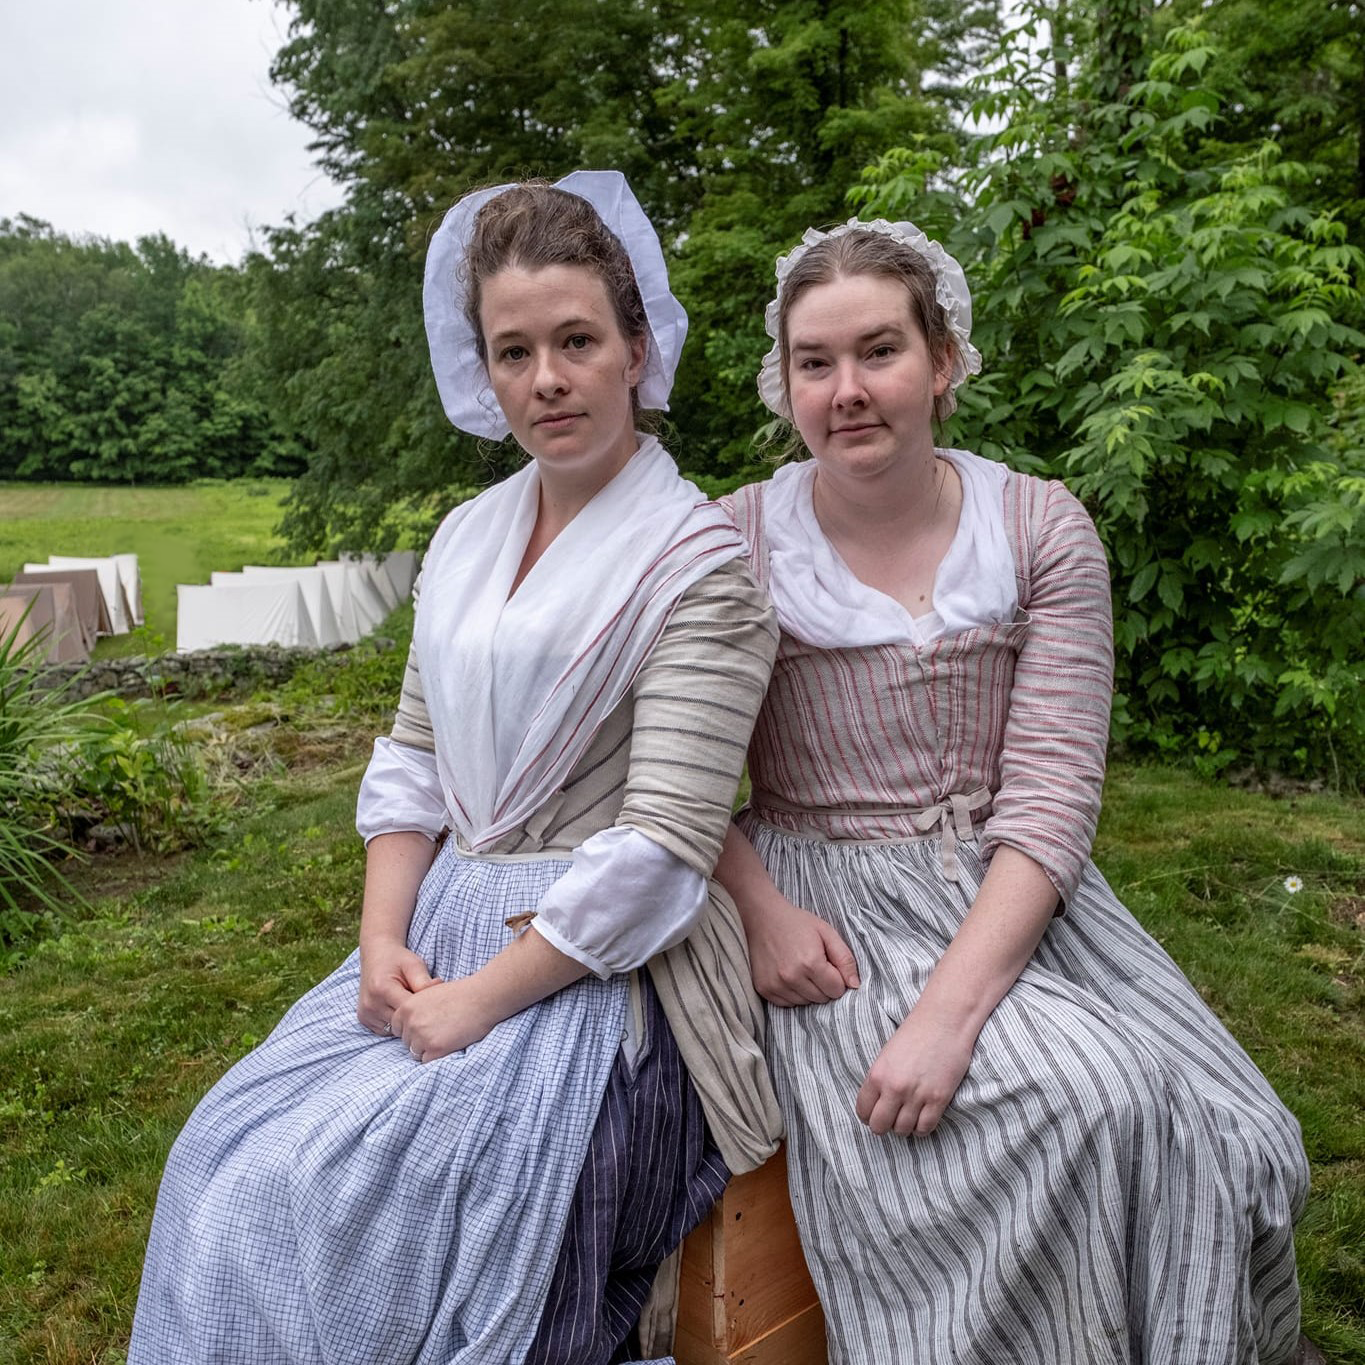 Two women in colonial American clothing seated outdoors